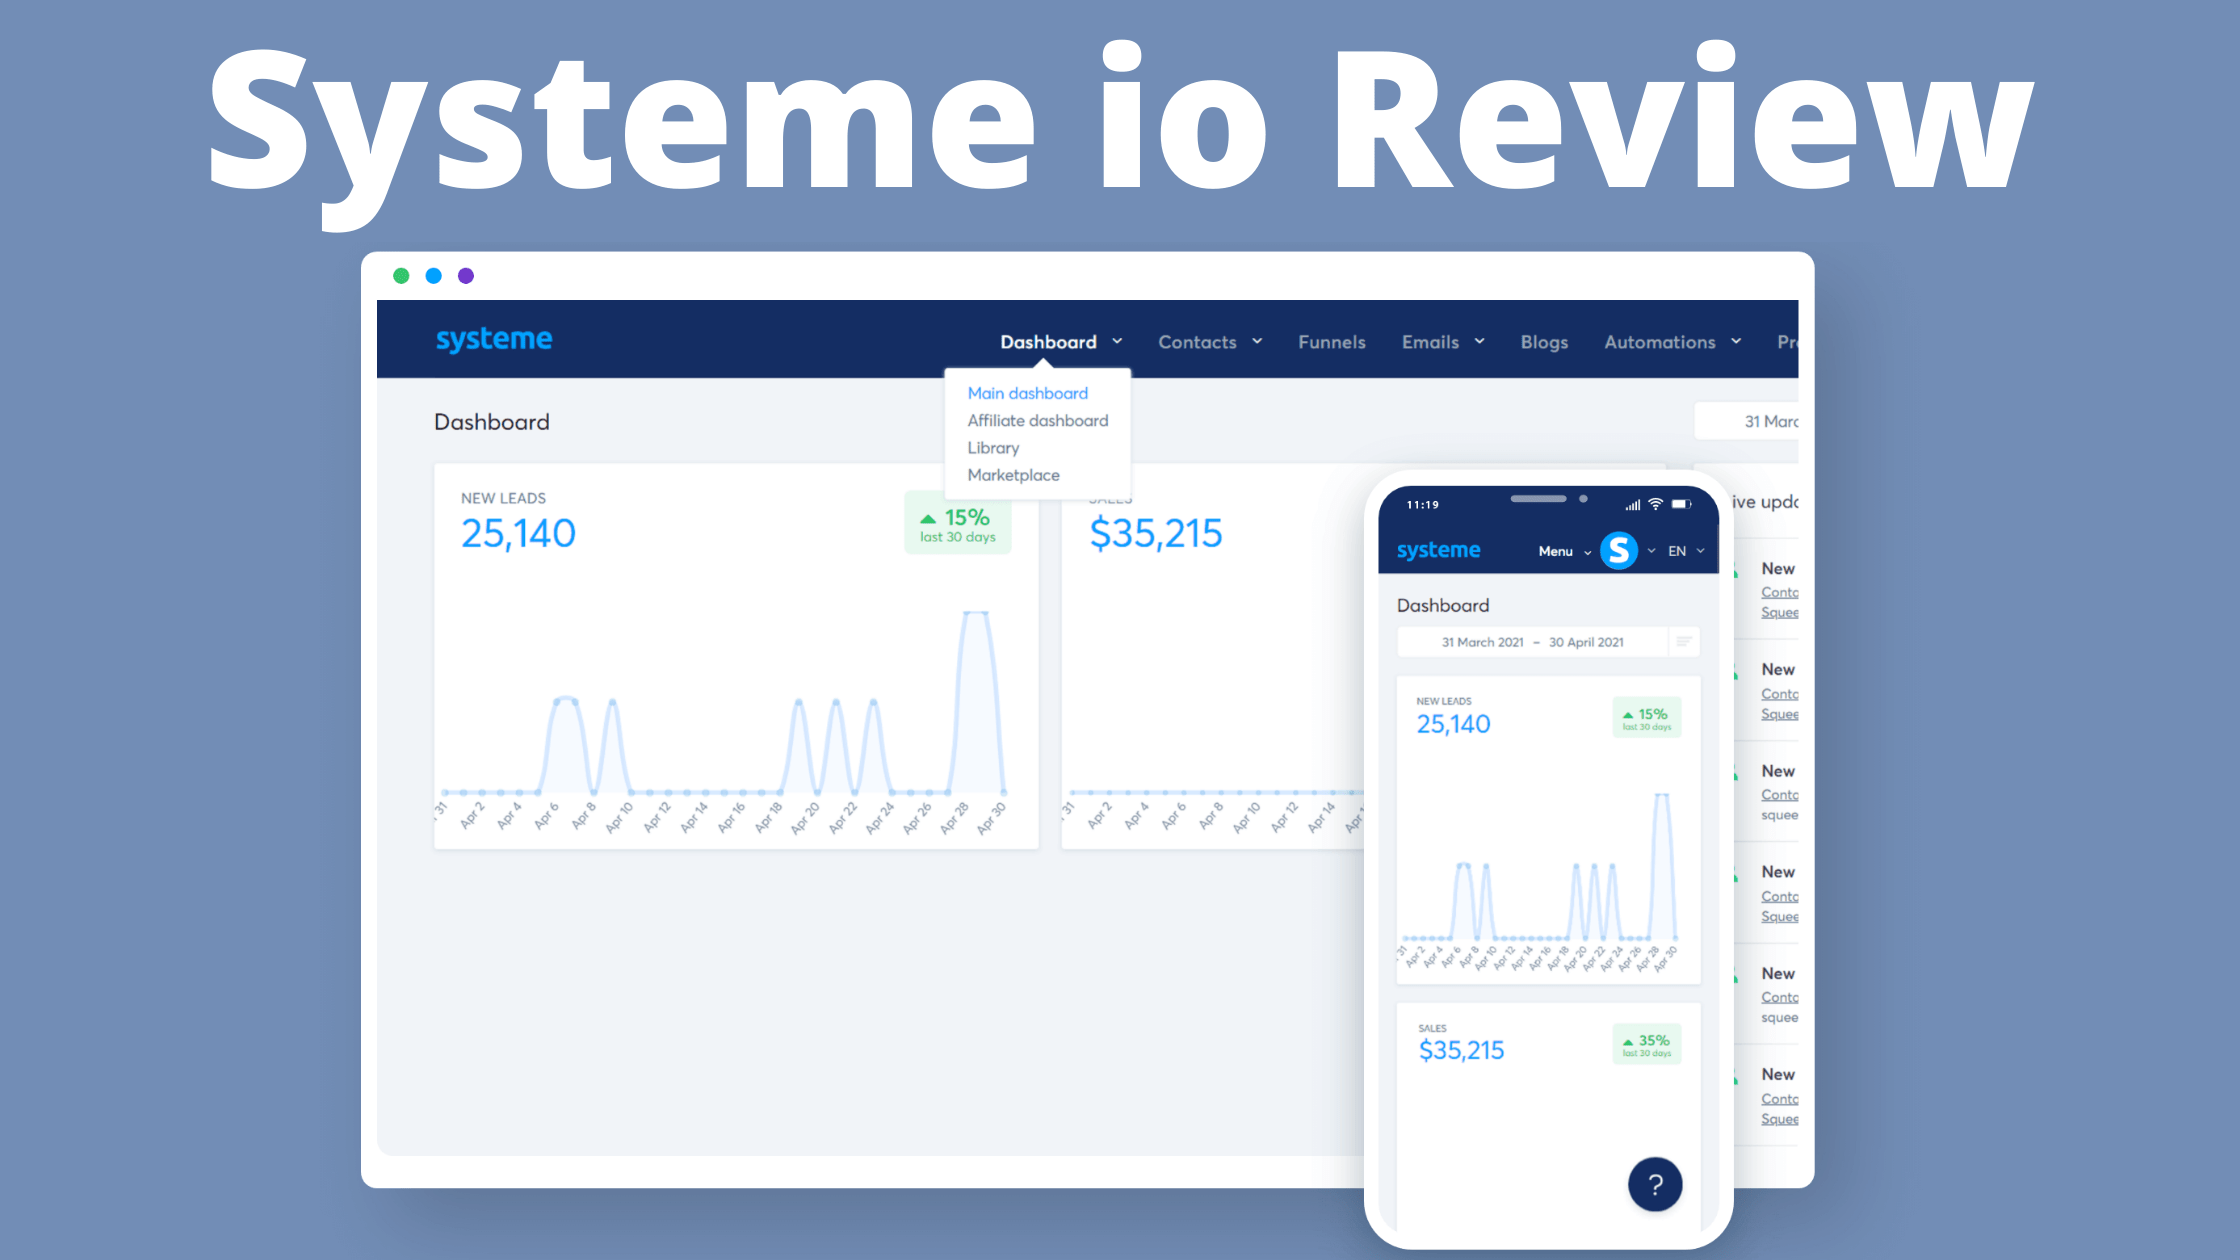 Systeme io Review